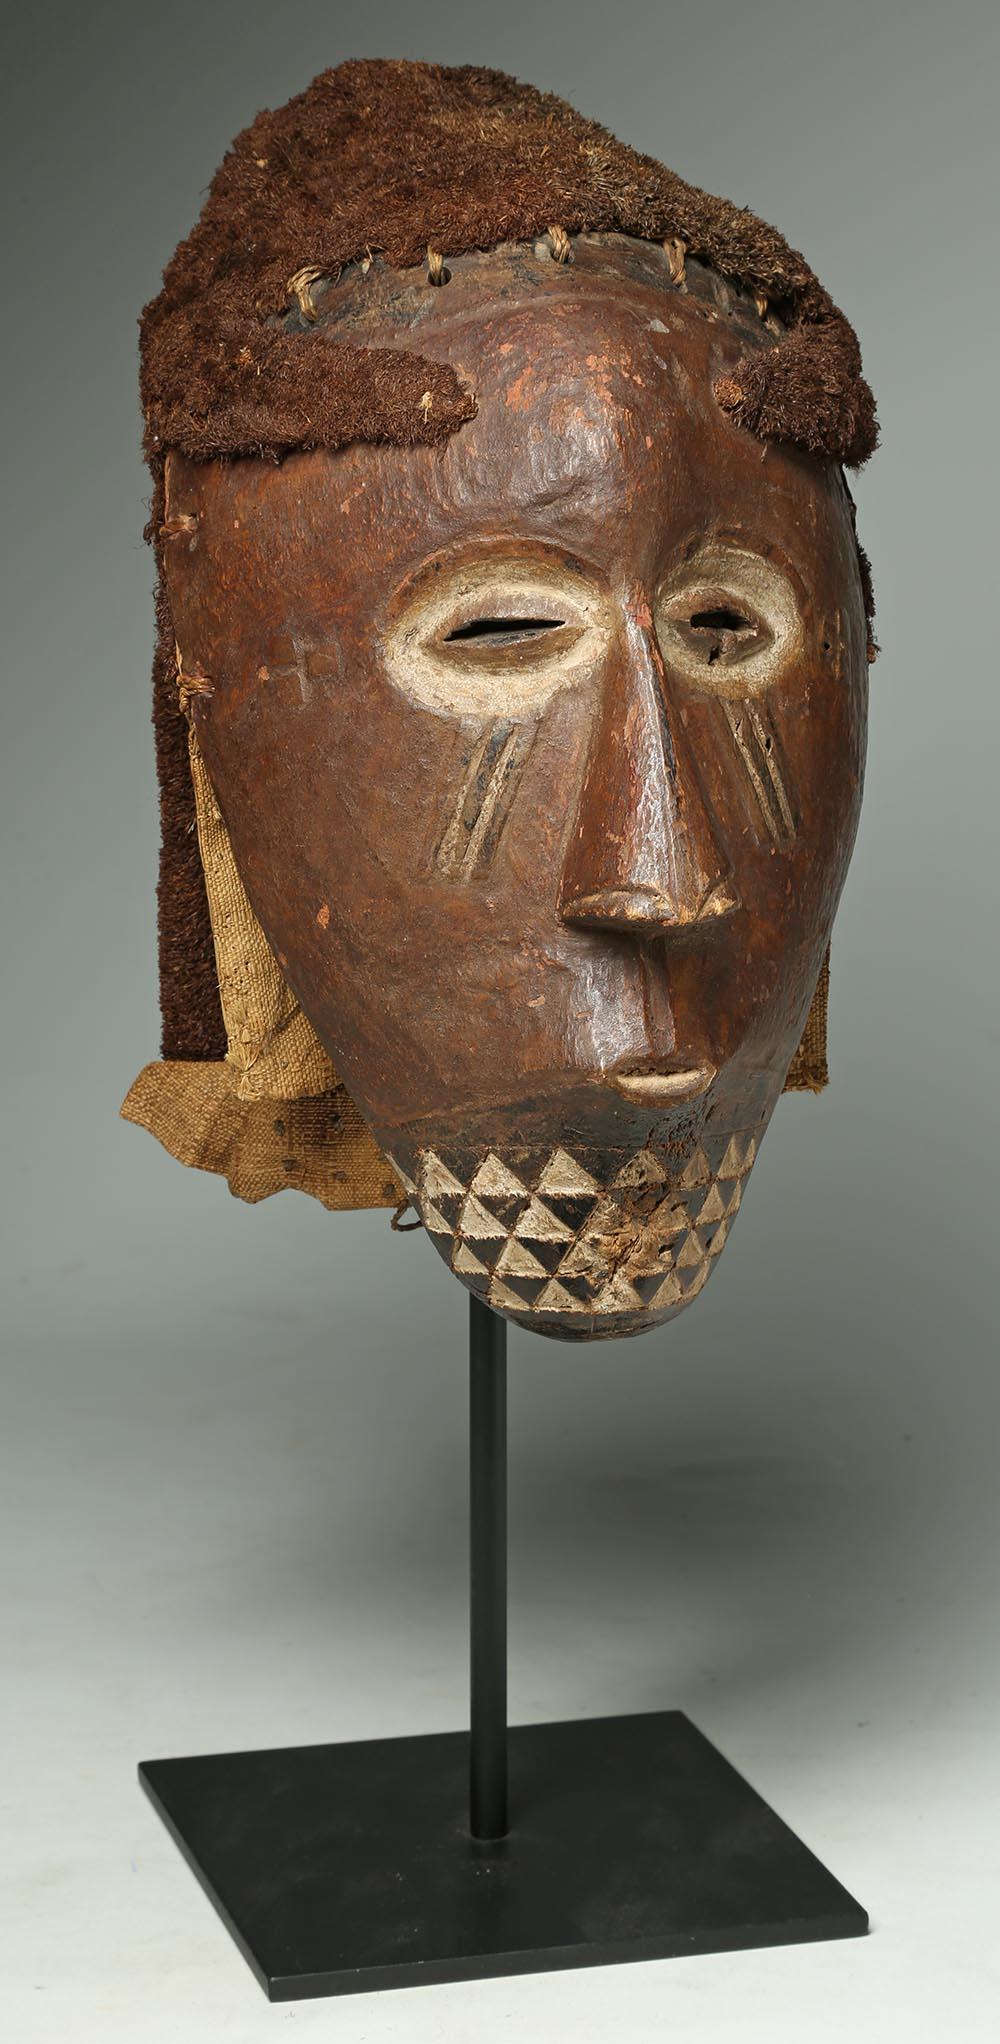 Hand-Carved Kuba Carved Wood Tribal Mask with Headress, Early 20th Century Congo, Africa For Sale